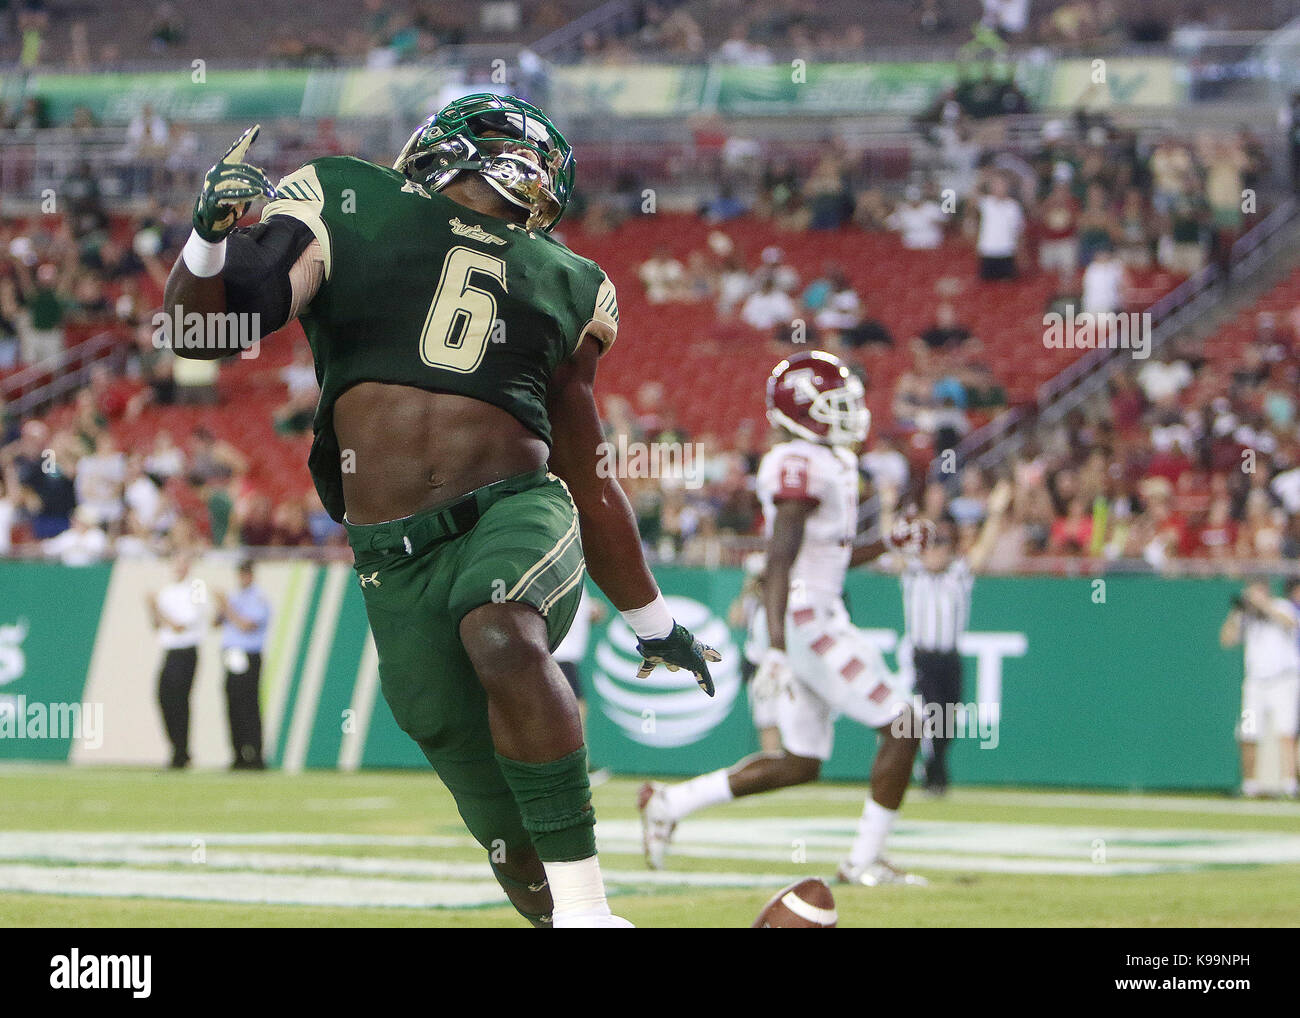 City, Florida, USA. 21st Sep, 2017. OCTAVIO JONES | Times .South Florida running back Darius Tice (6) scored a touchdown against the Temple Owls defense during the first half at Raymond James Stadium in Tampa, Florida on Thursday, September 21, 2017. Credit: Octavio Jones/Tampa Bay Times/ZUMA Wire/Alamy Live News Stock Photo